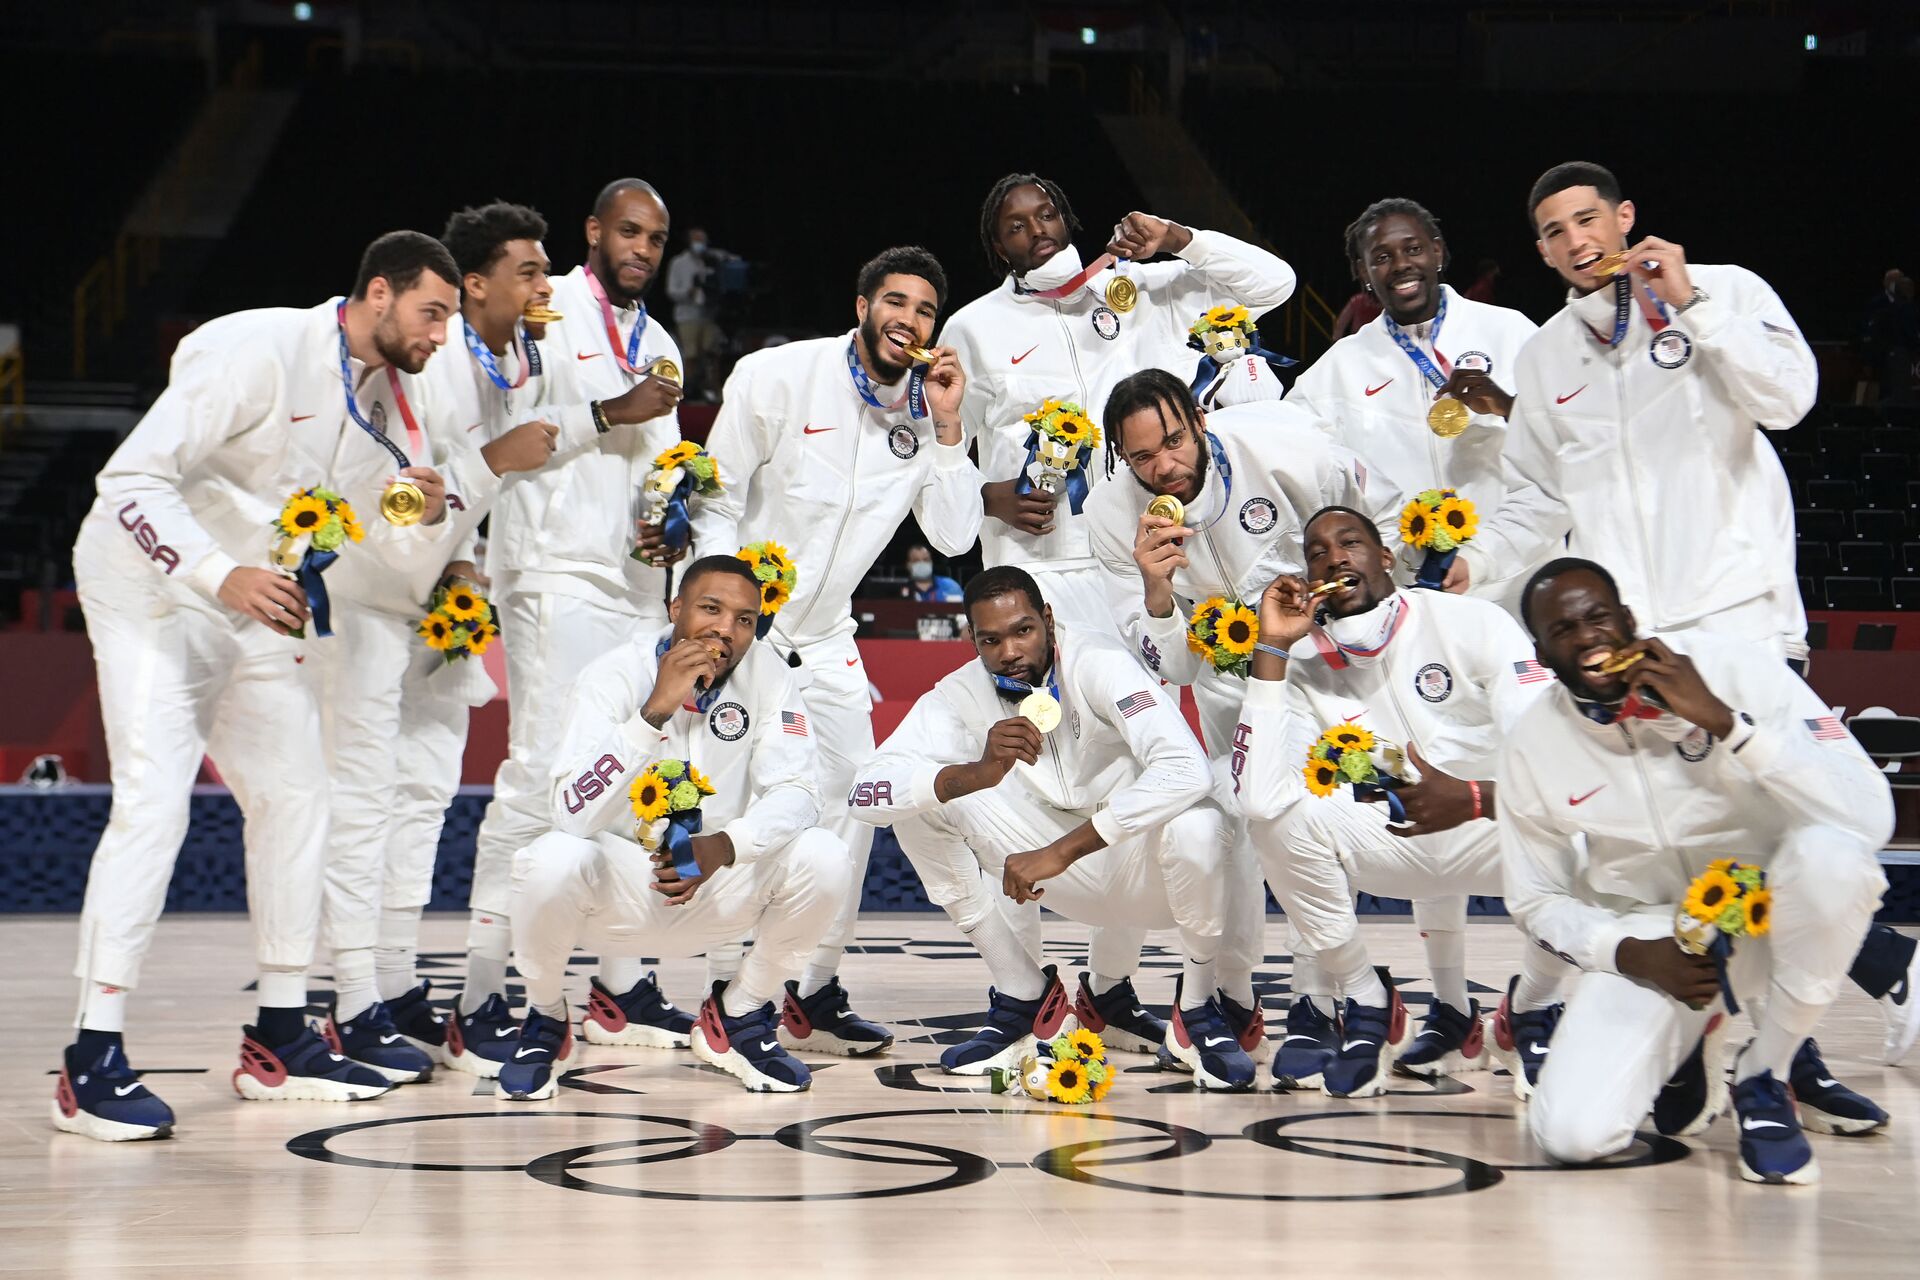 First placed USA's team pose for pictures with their gold medals as they celebrate after the medal ceremony for the men's basketball competition of the Tokyo 2020 Olympic Games - Sputnik International, 1920, 07.09.2021